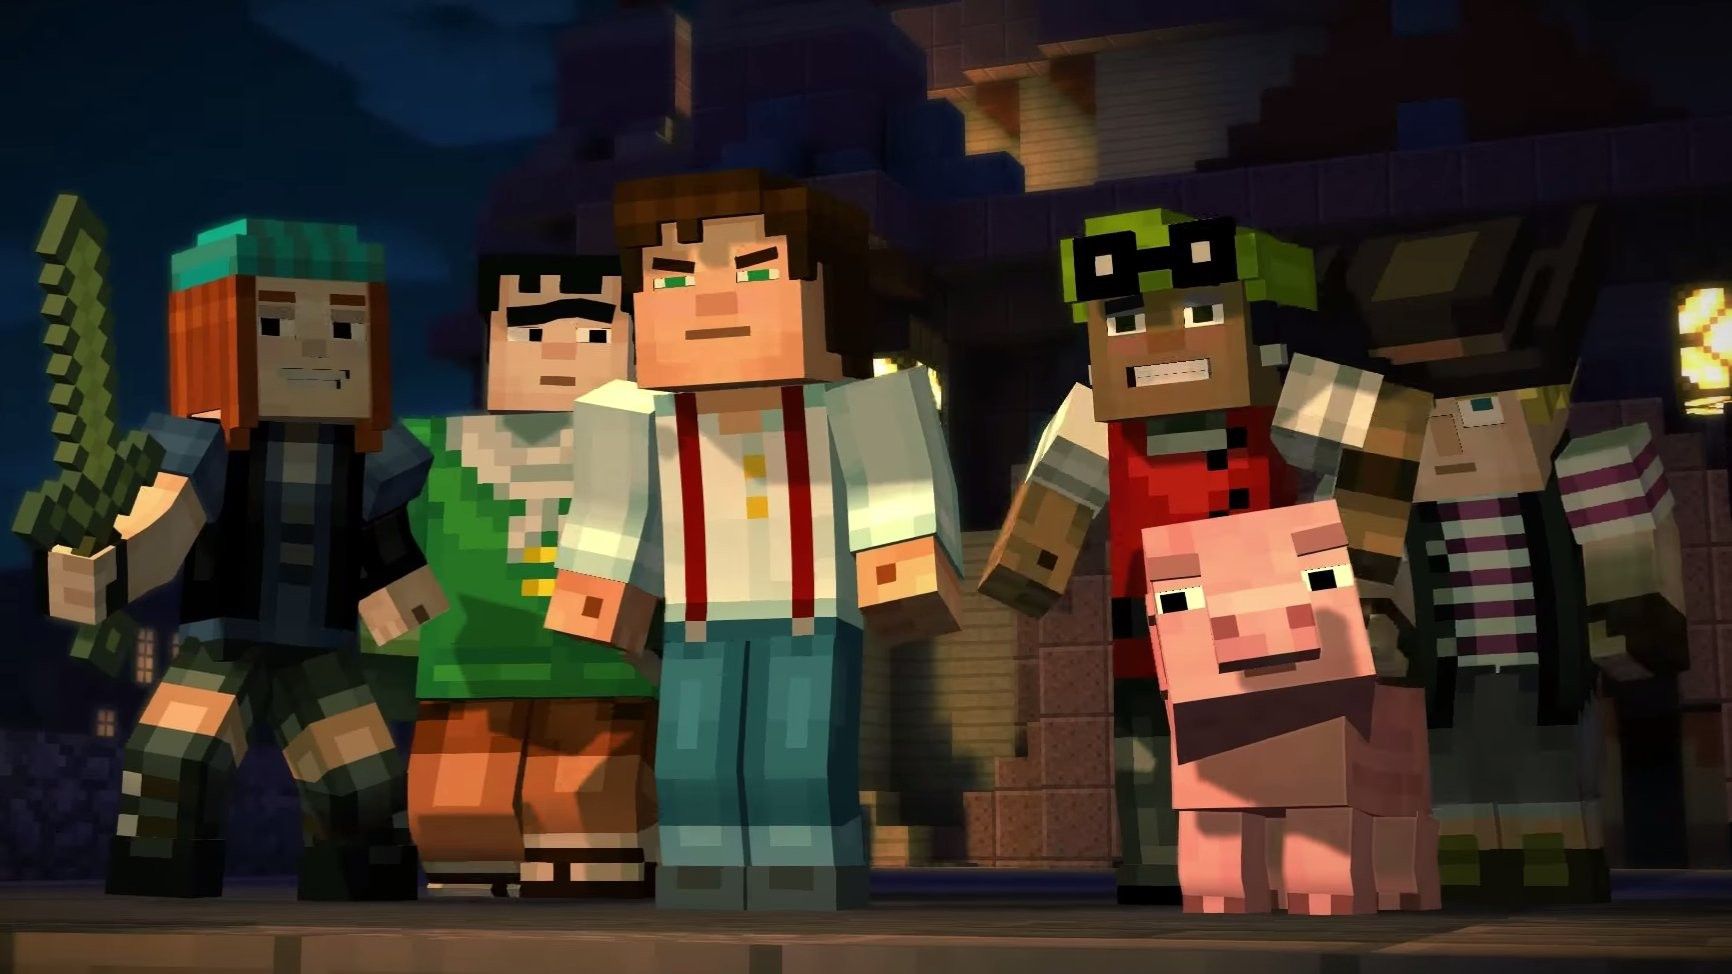 Minecraft: Story Mode Episode 1: The Order of the Stone review